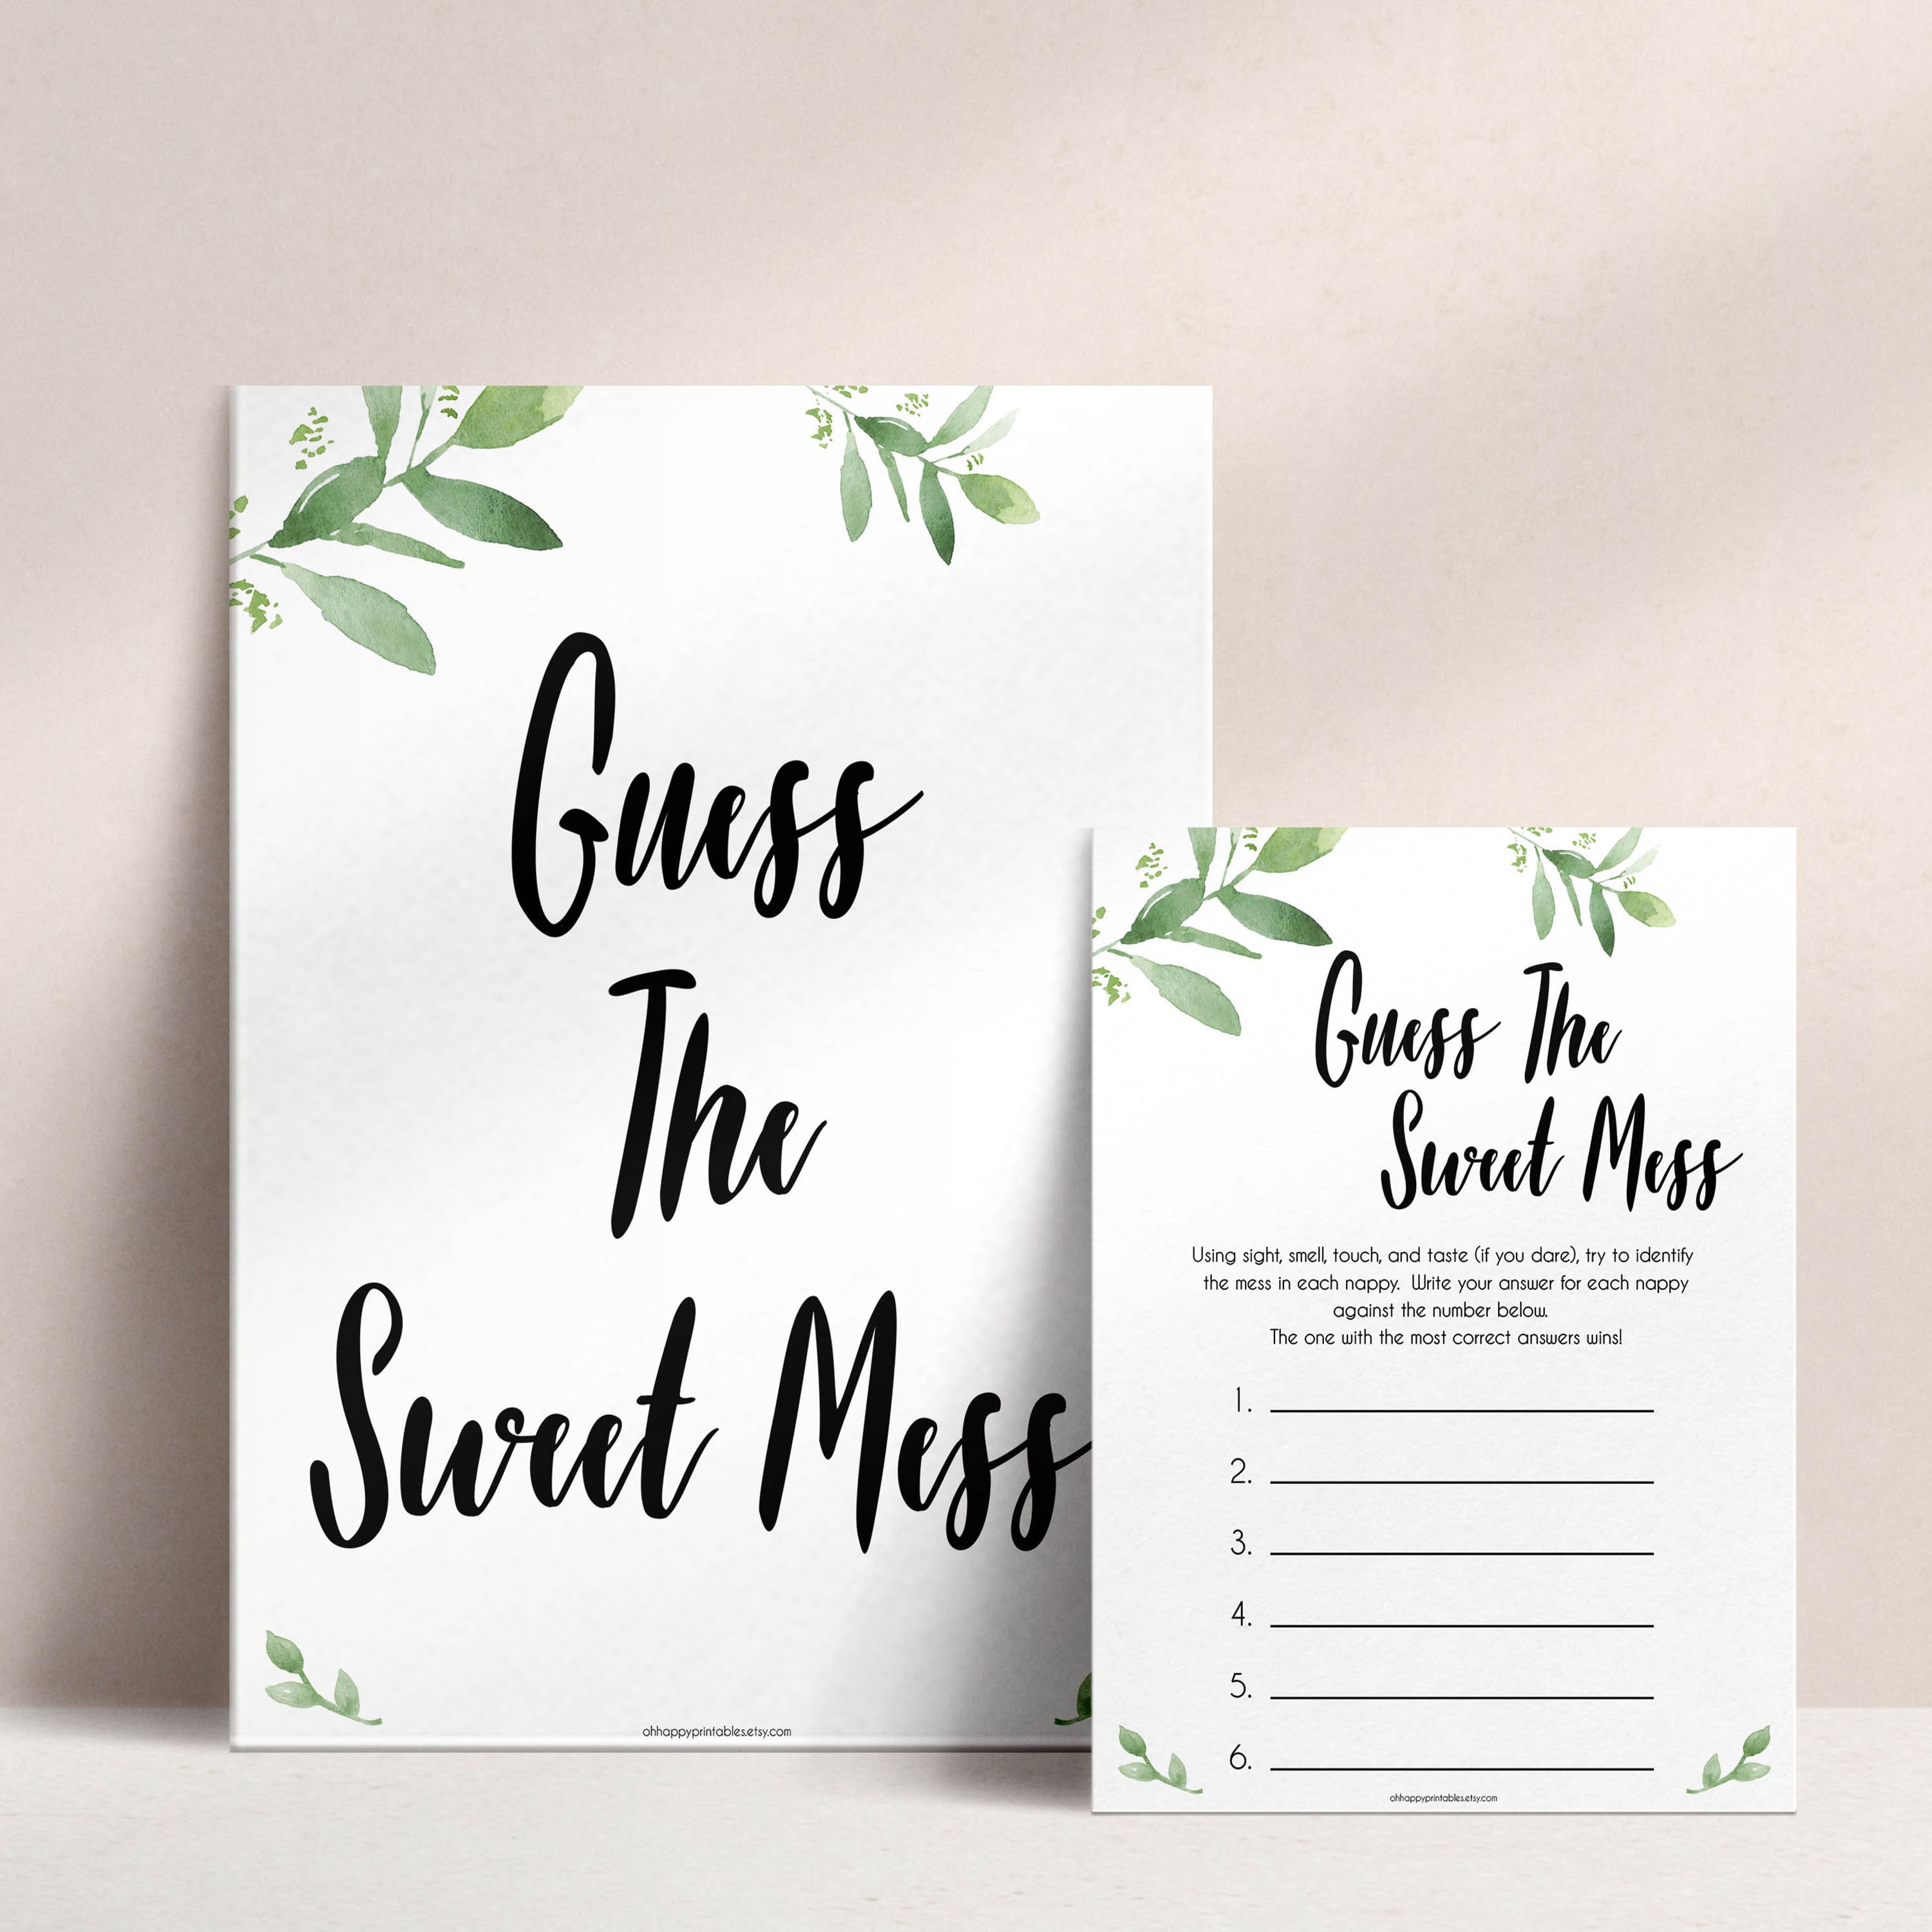 Botanical Baby Shower Guess The Mess Game, Greenery Baby Shower Guess The Sweet Mess, Baby Shower Games, Guess The Mess, Baby Games